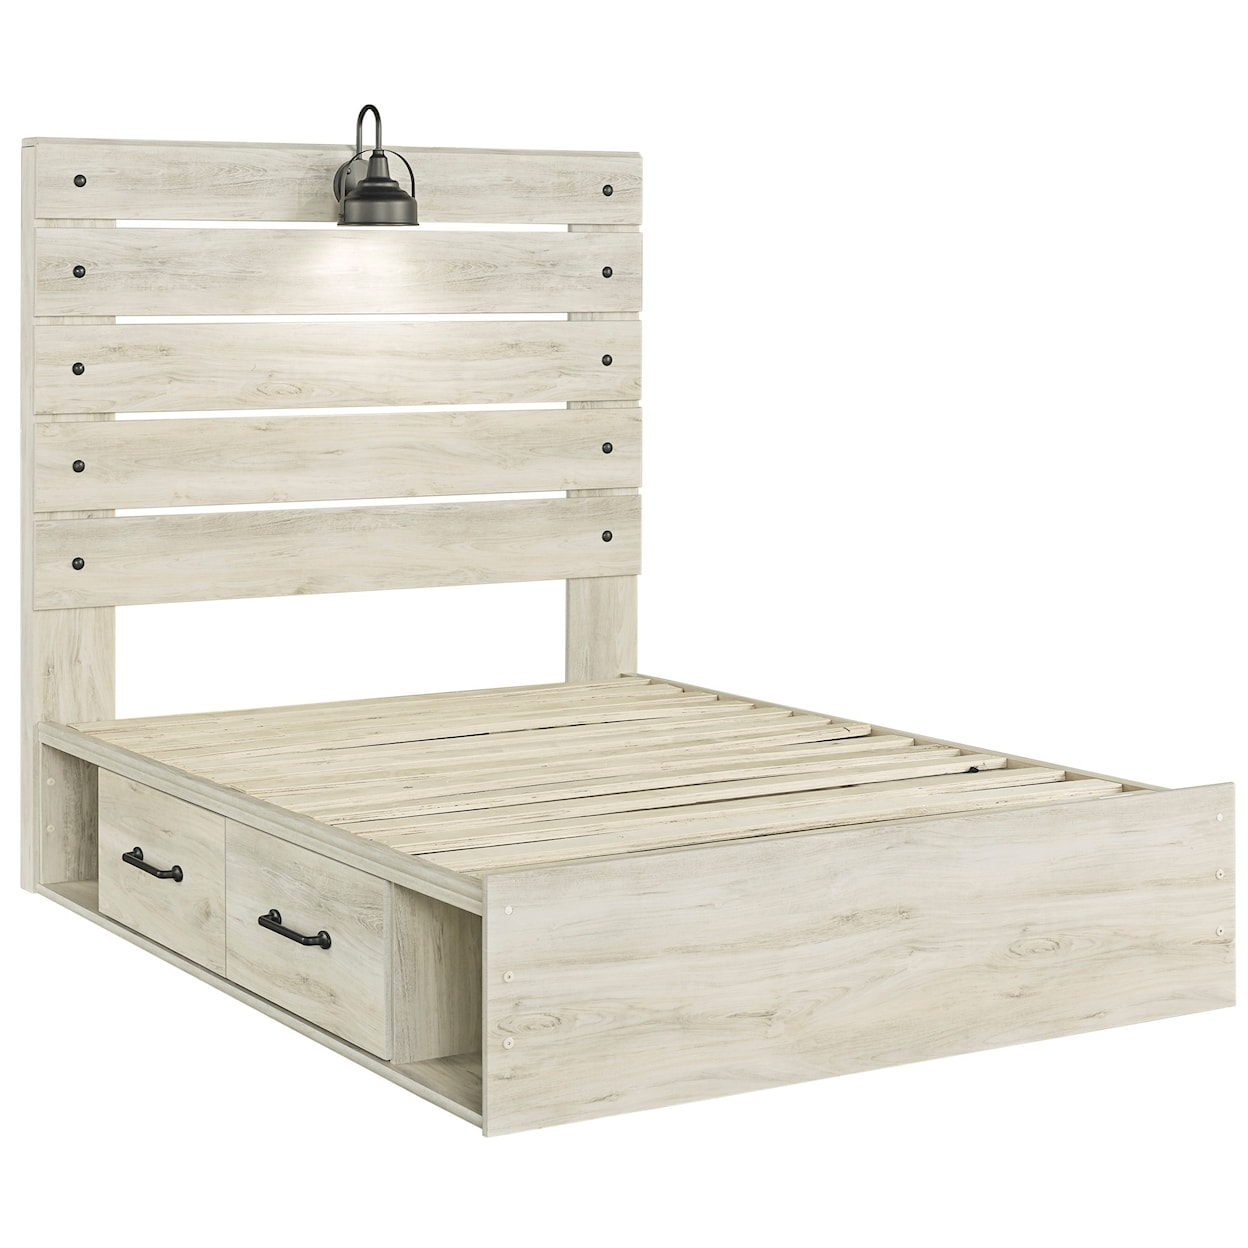 Signature Design by Ashley Cambeck Full Storage Bed with 2 Drawers